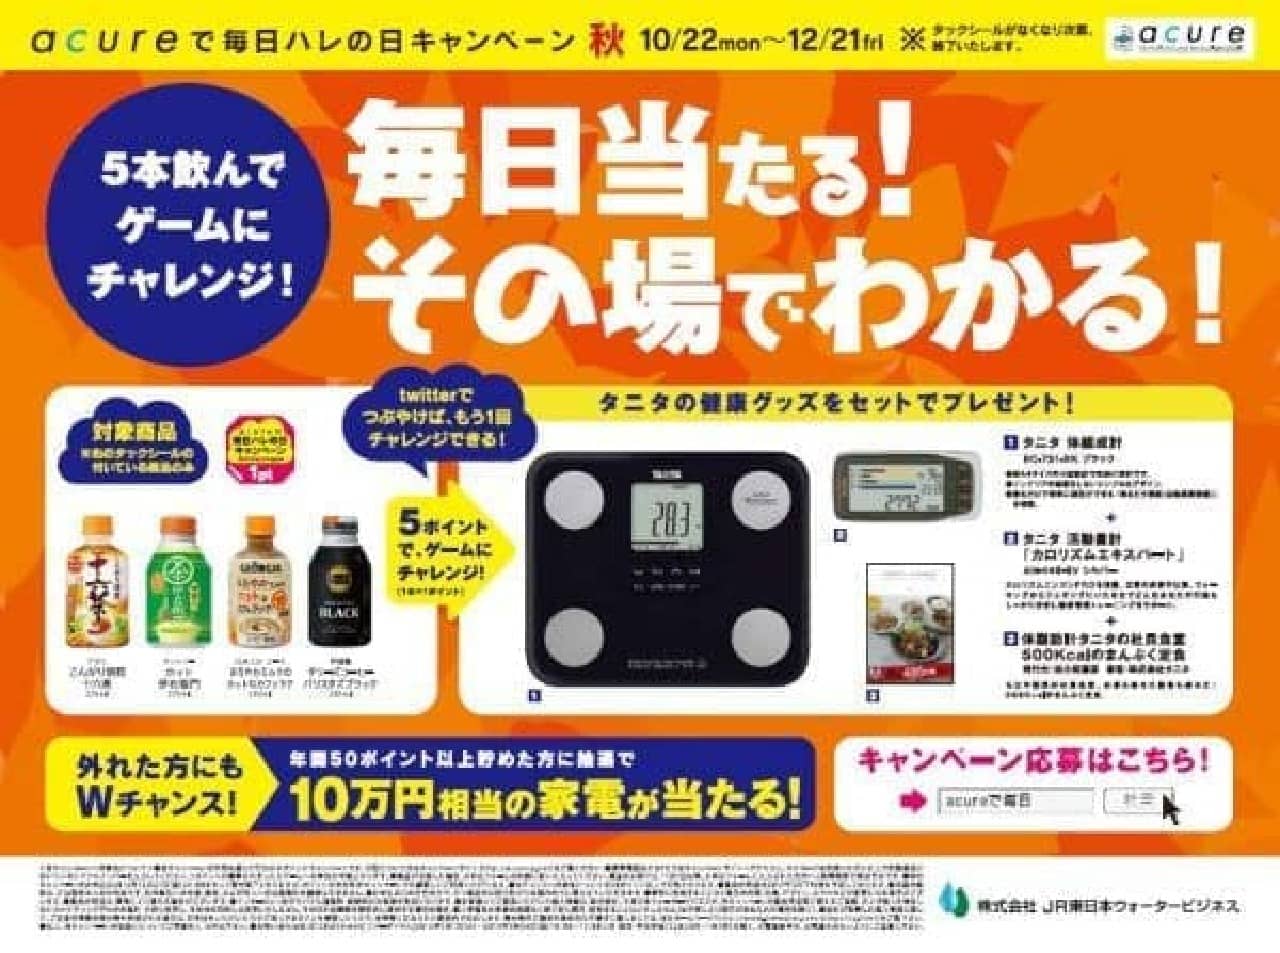 "Tanita Goods" will be won by lottery "Everyday Halle Day Campaign with acure"